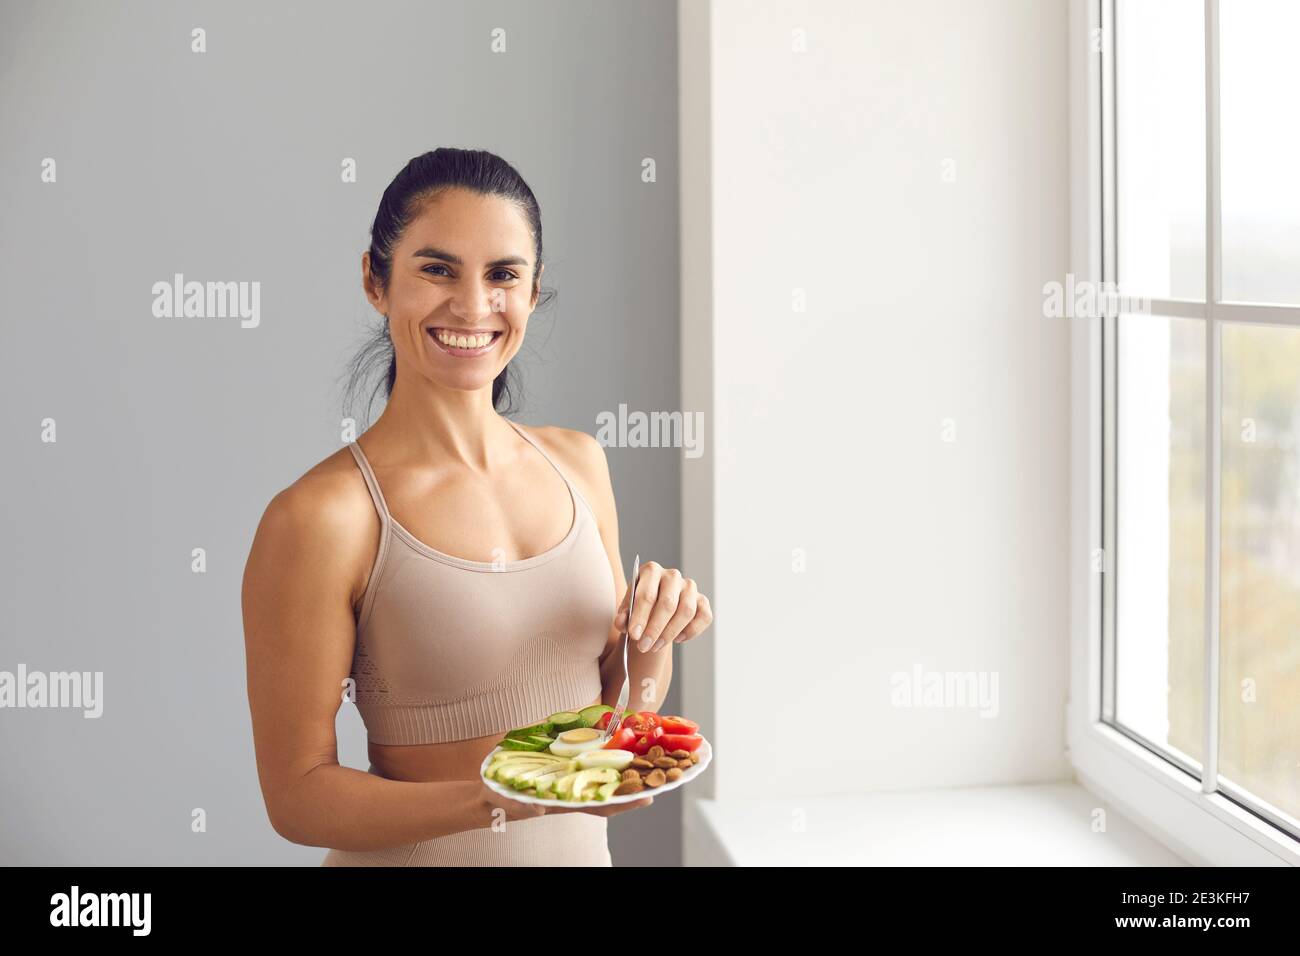 Active healthy lifestyle, vegetarian food concept Stock Photo